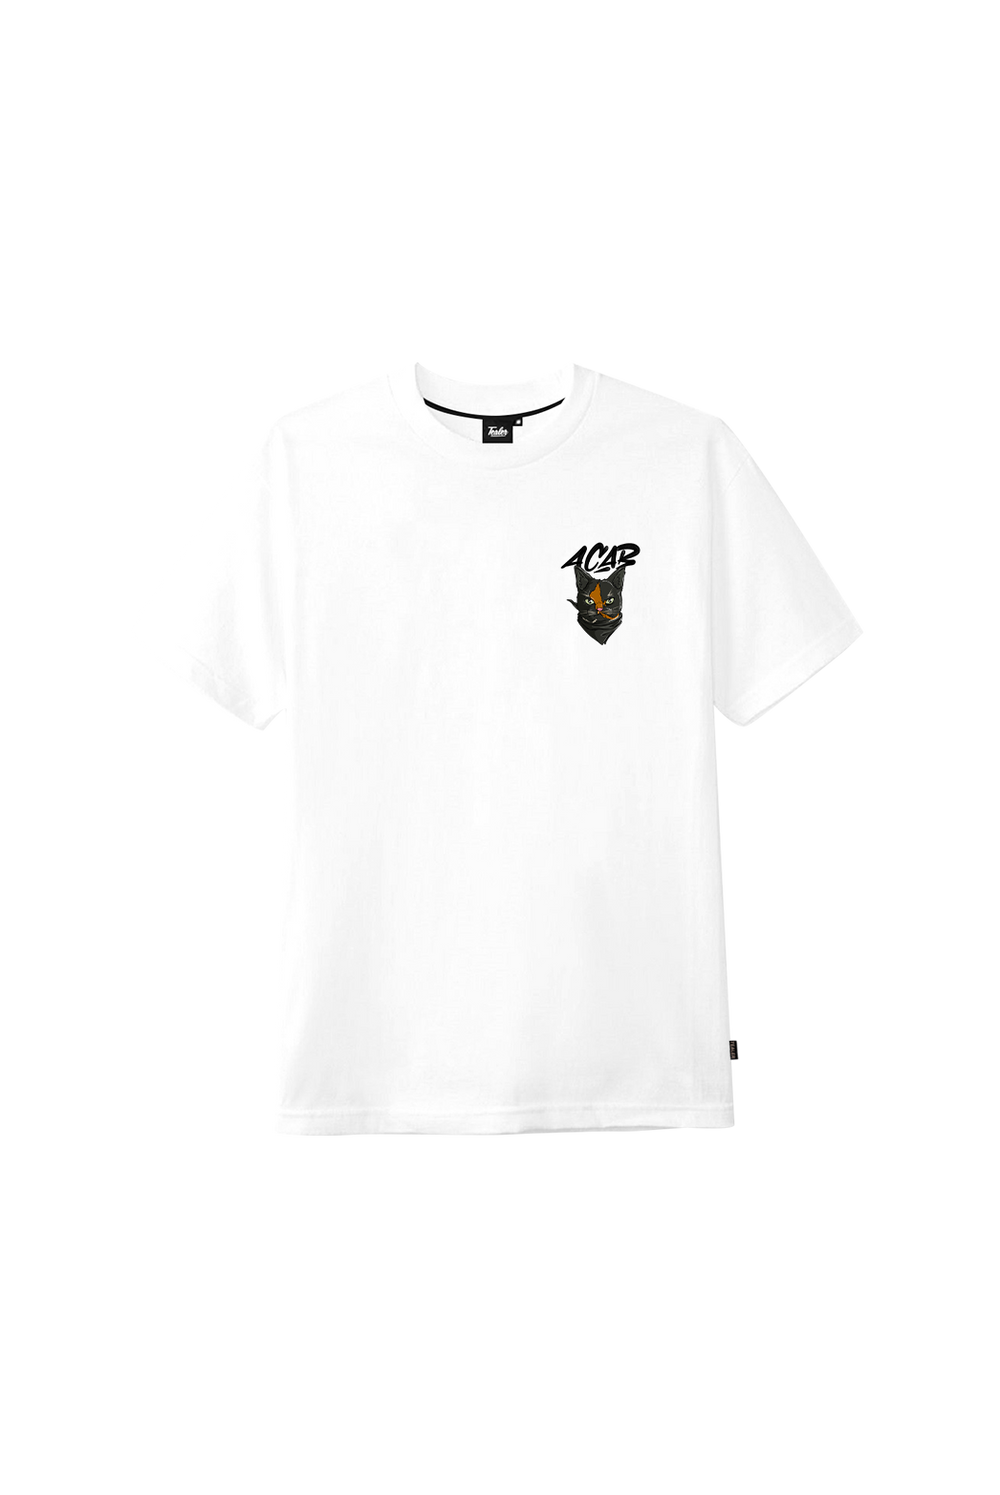 Tealer ACAB All Cats Are Beautifull, Tee White